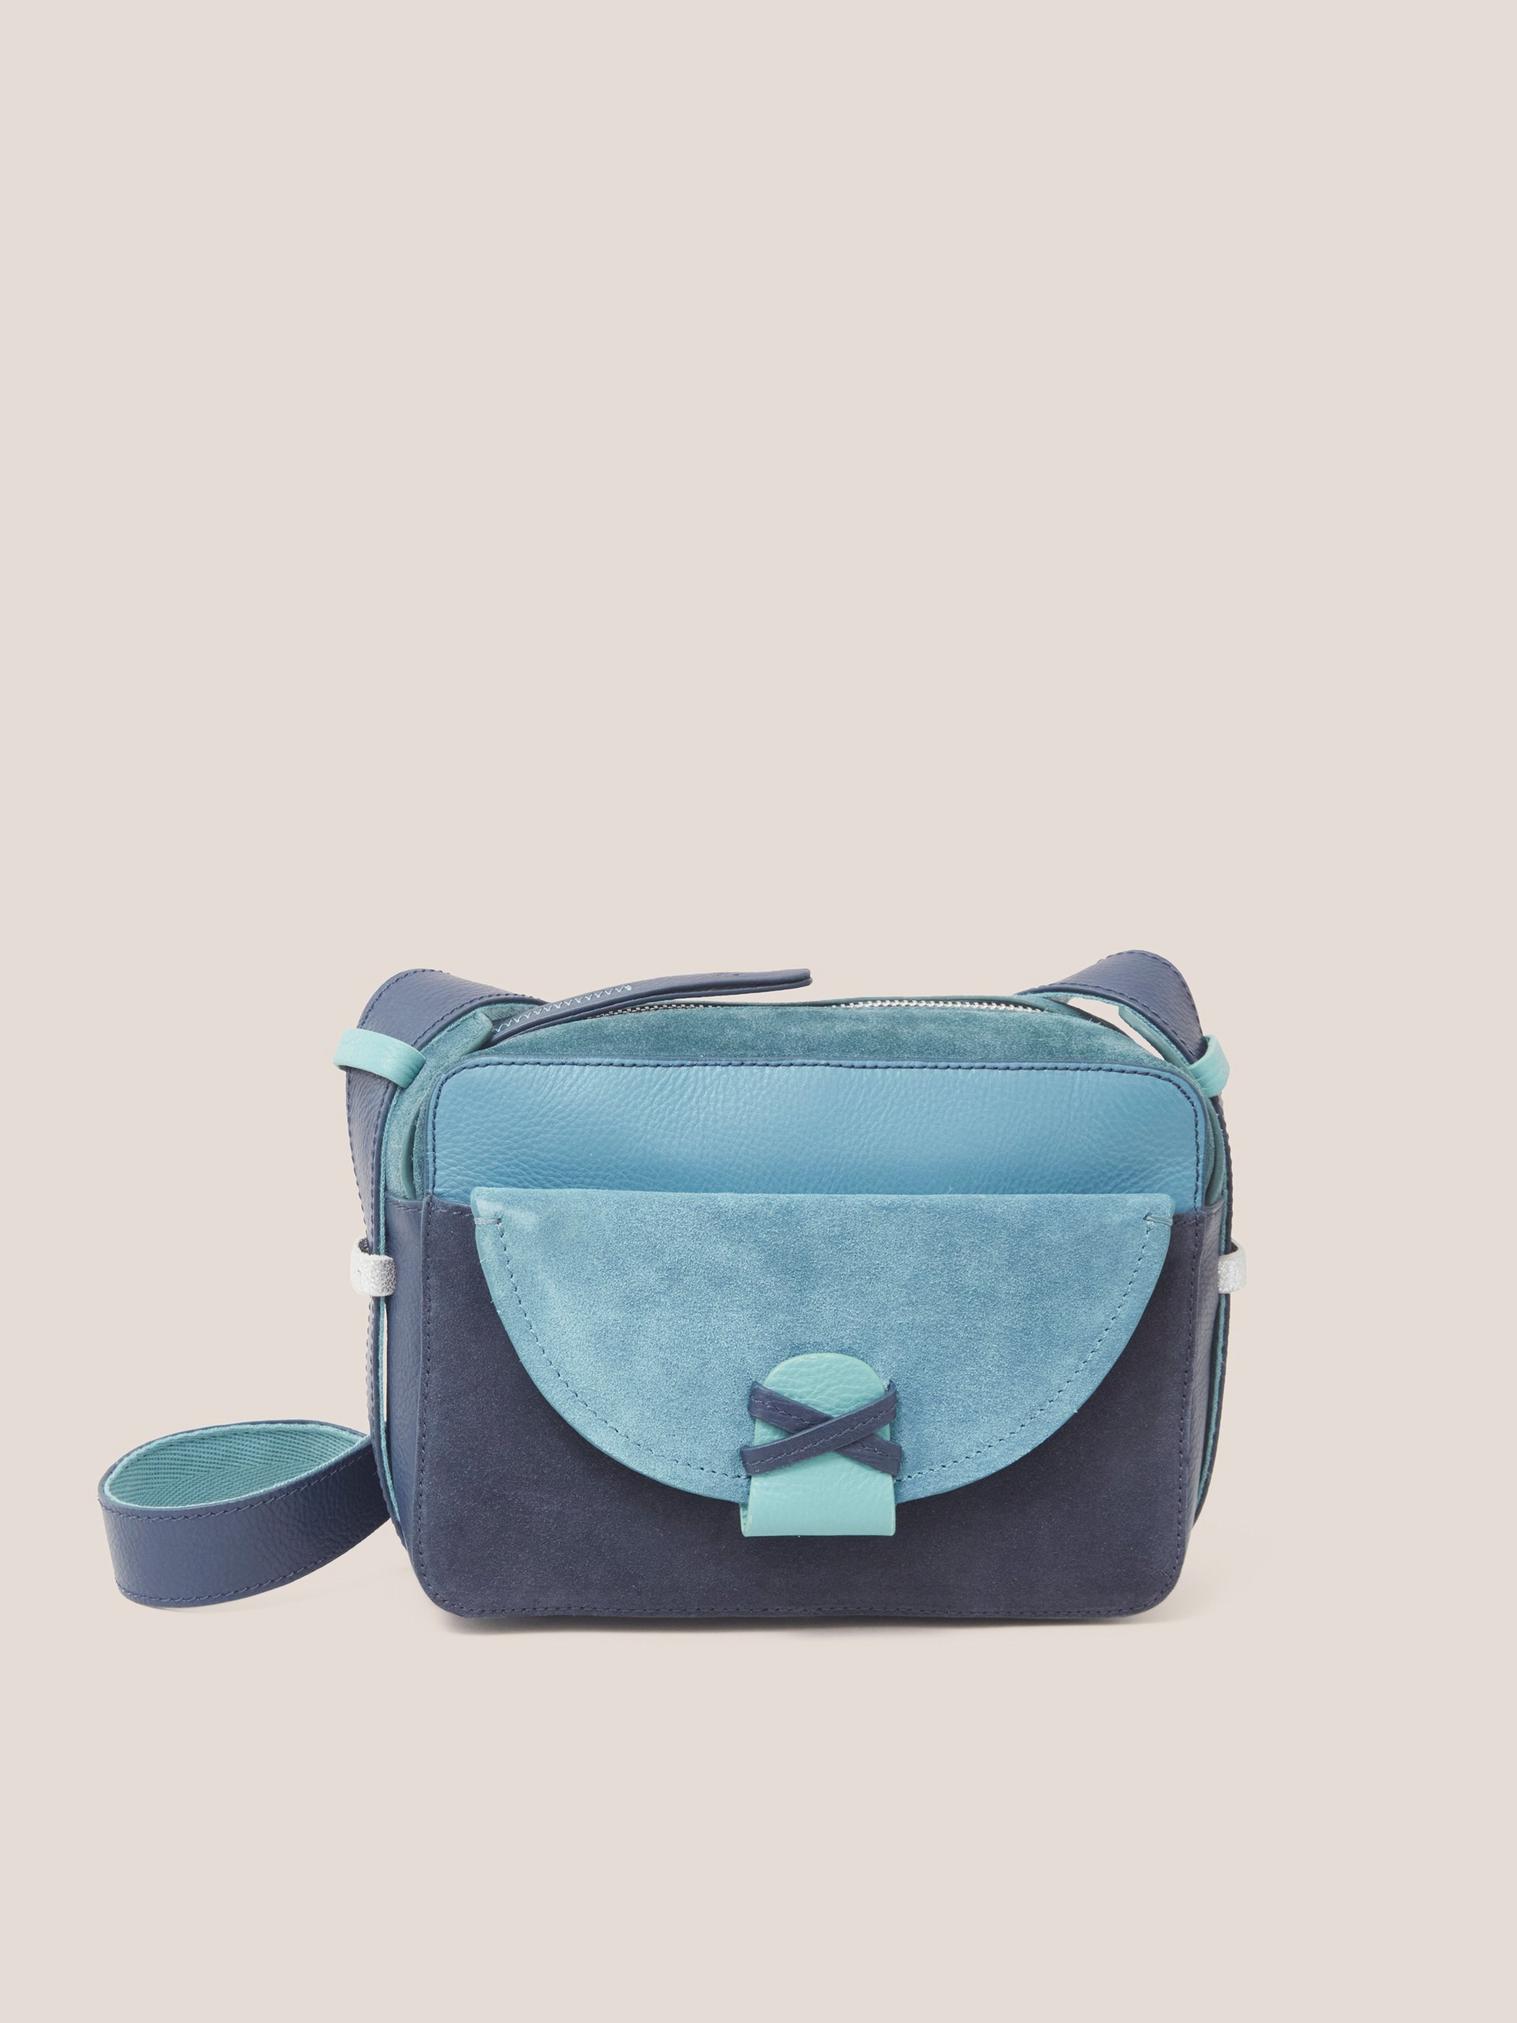 Lola Leather Camera Bag in NAVY MULTI - LIFESTYLE